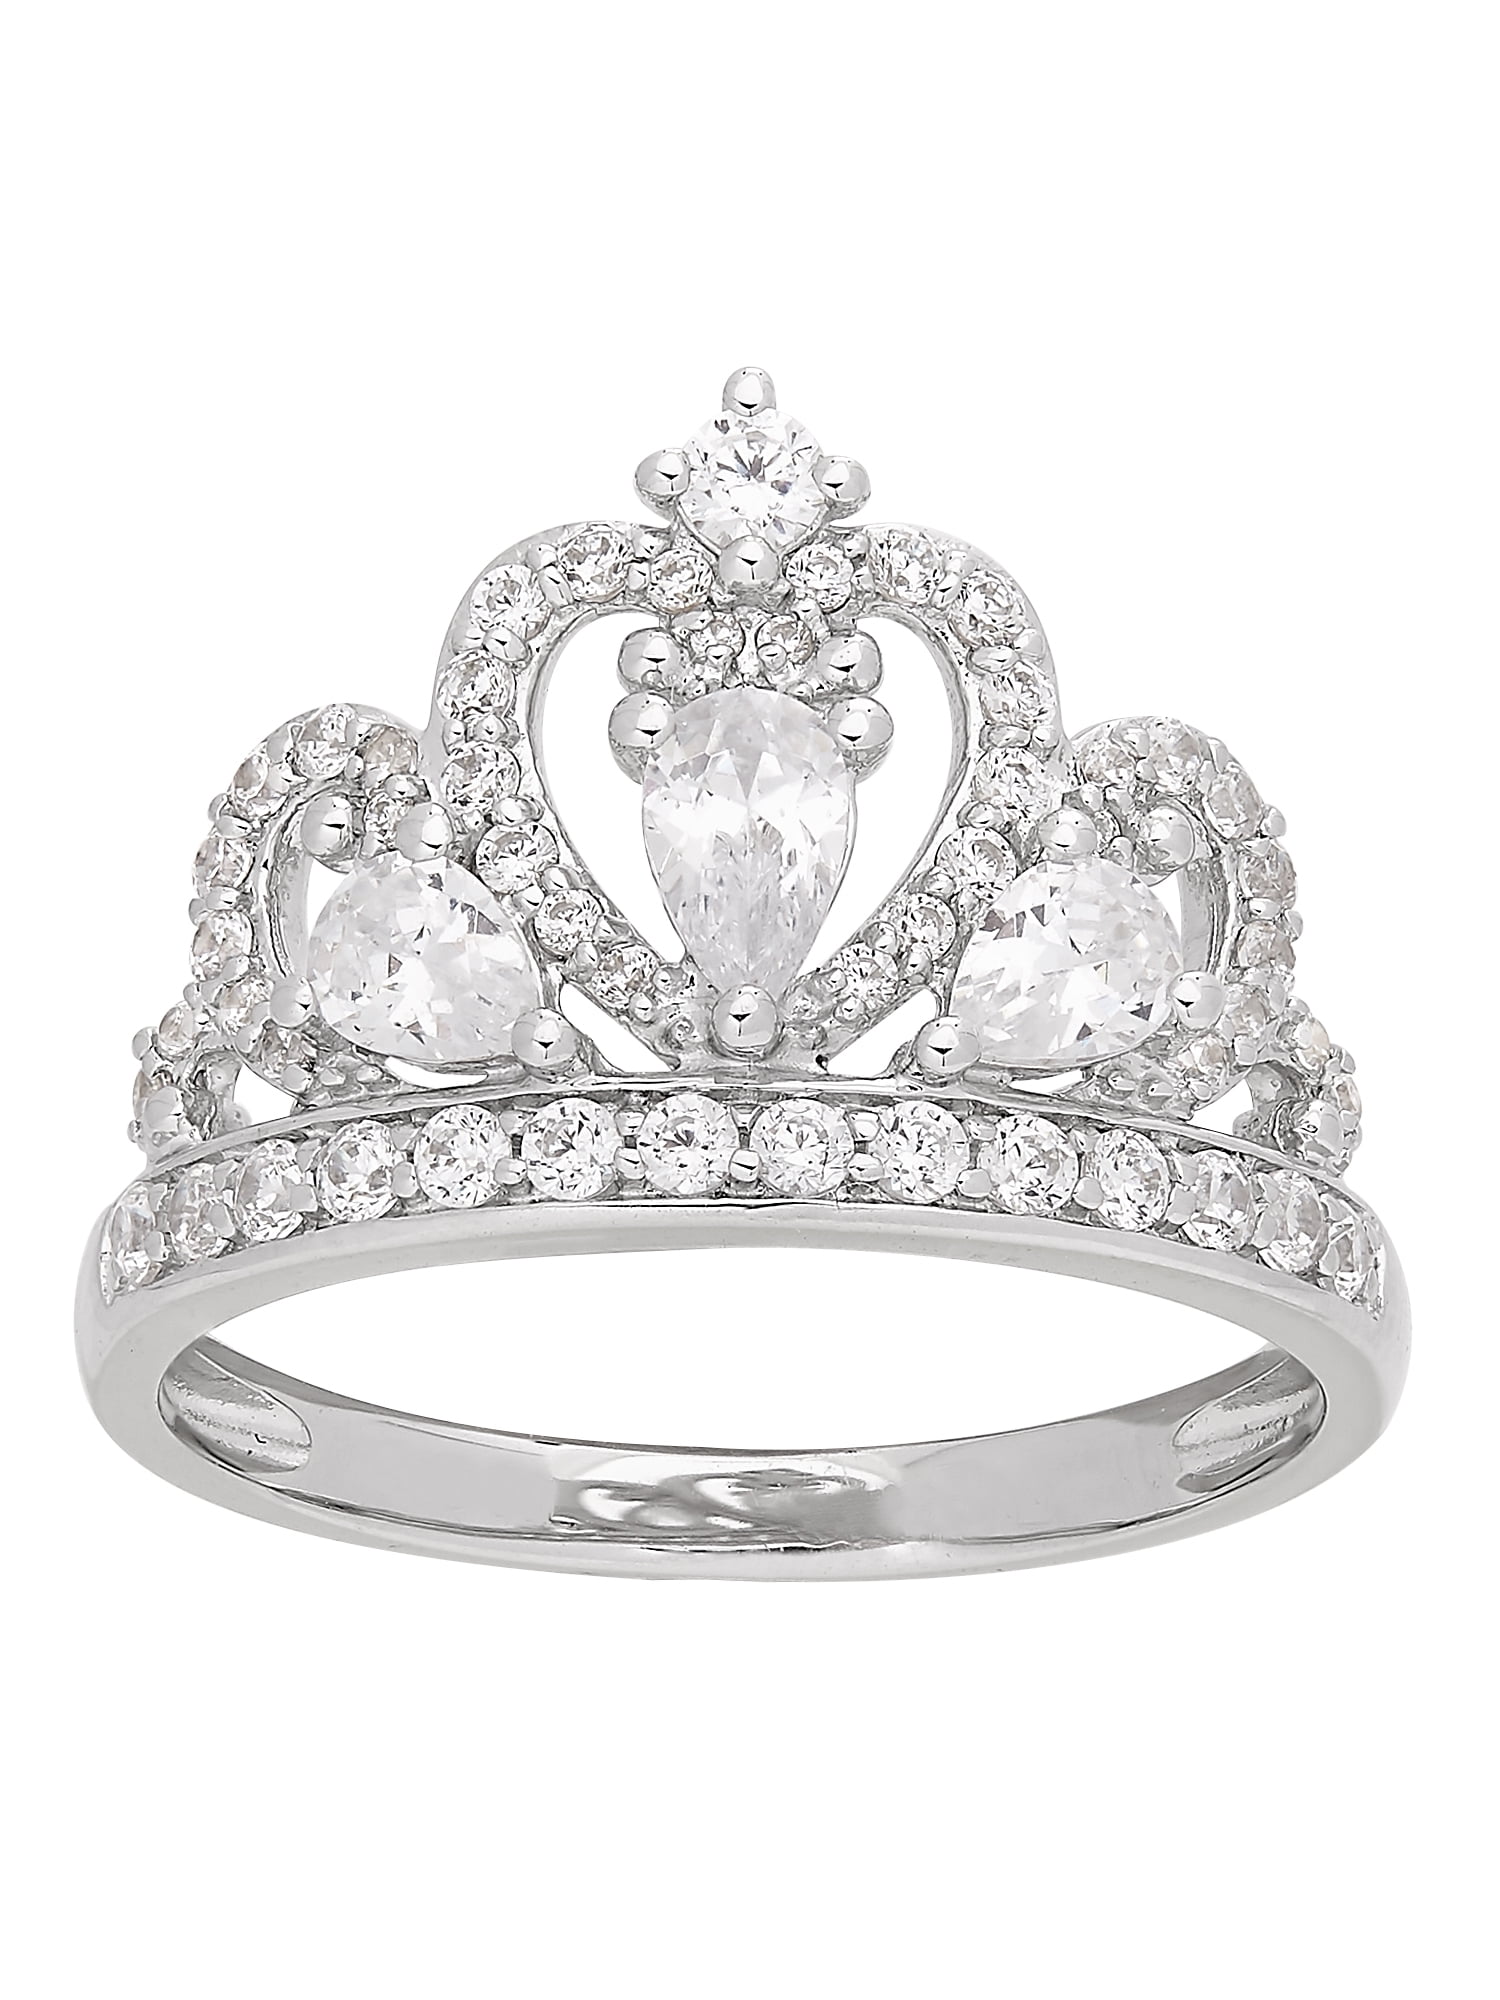 Rings/925 Silver/ Crown & Clear CZ Rings For Women Fashion Jewelry